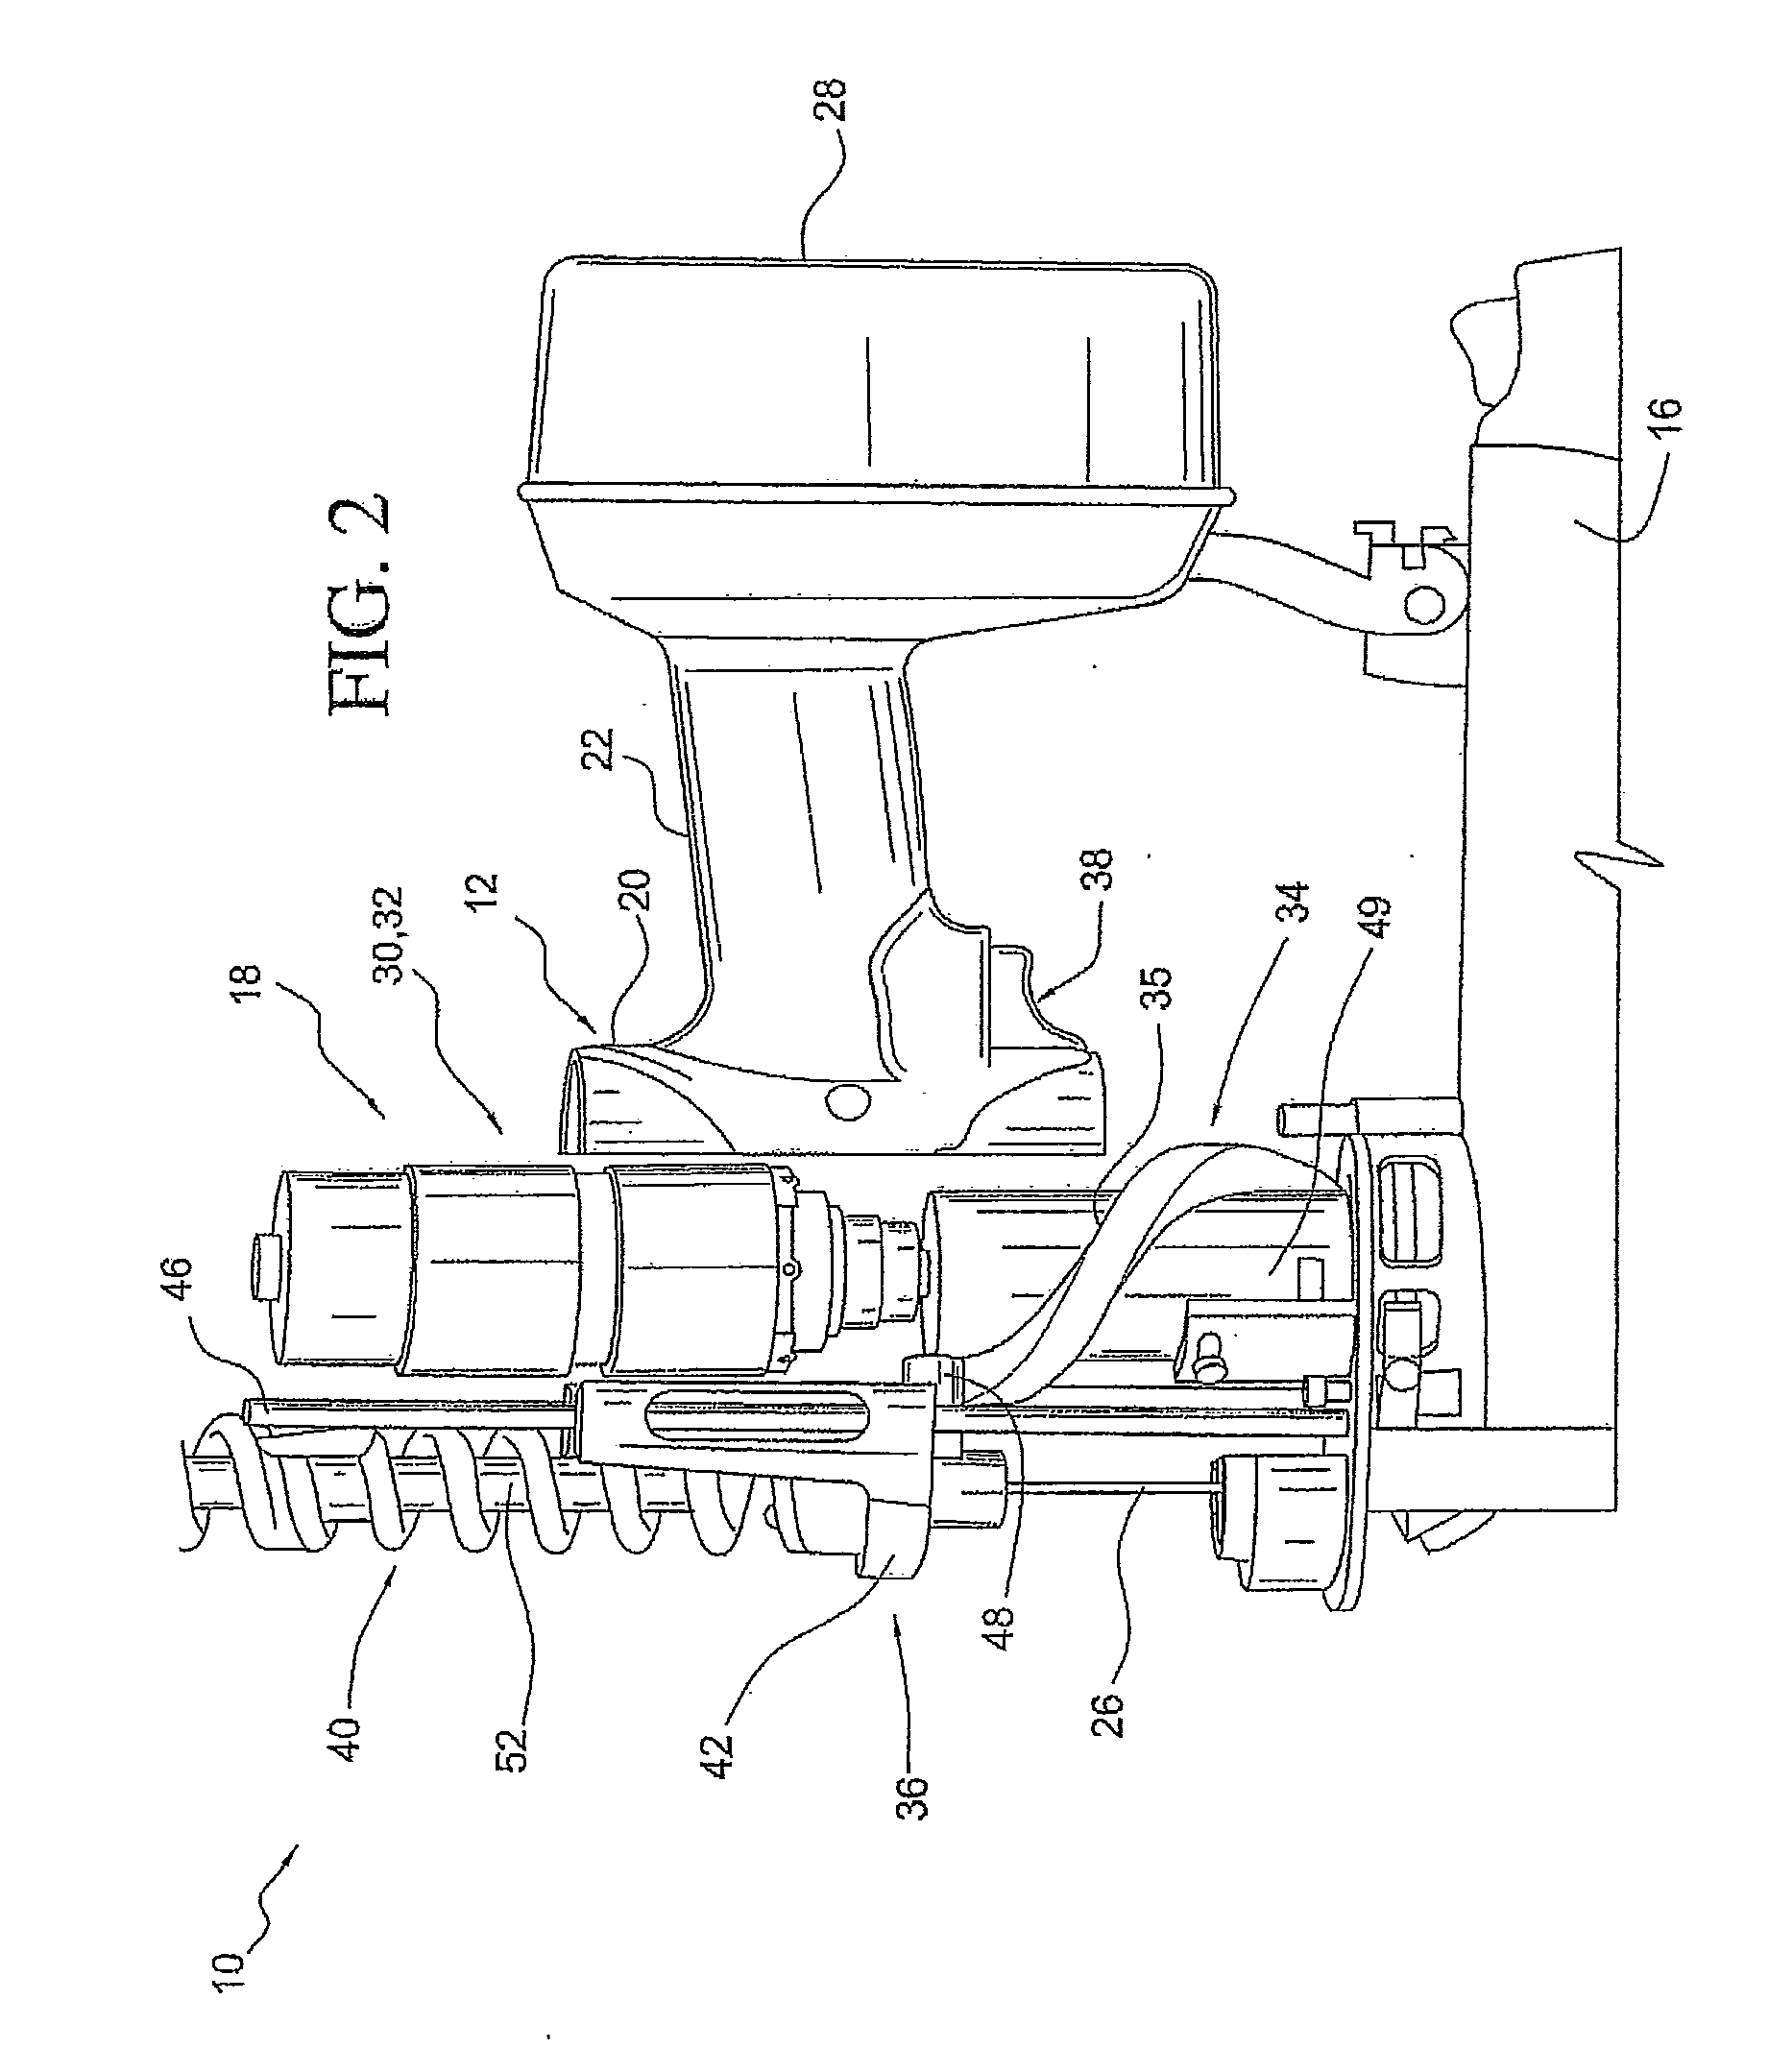 Fastener driving device